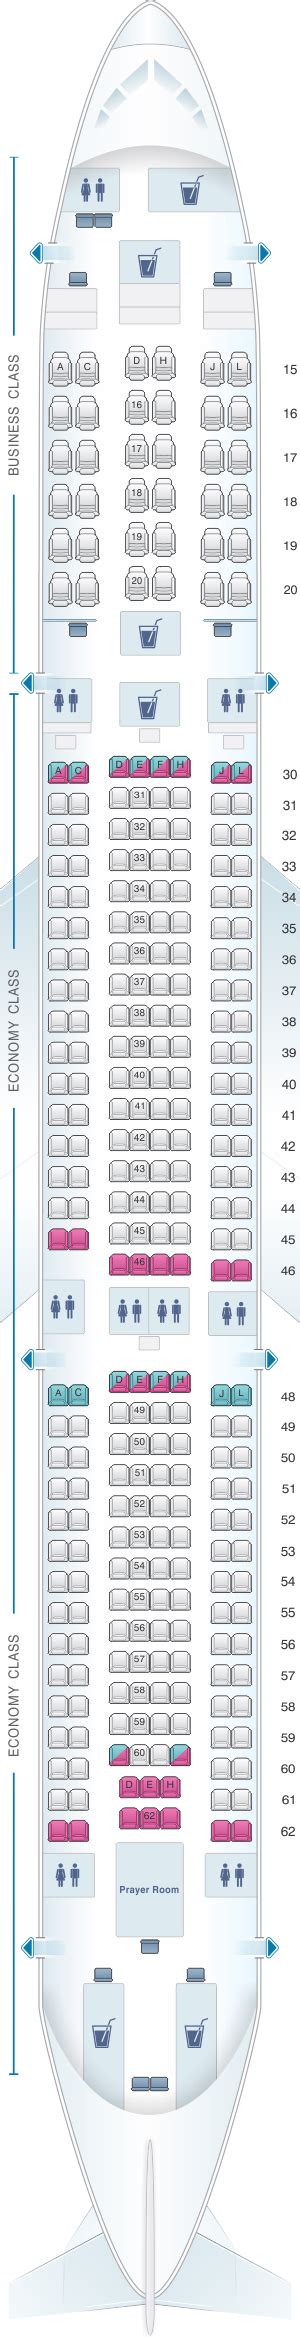 Gallery Of Seat Map Airbus A310 300 Air Transat Best Seats In The Plane